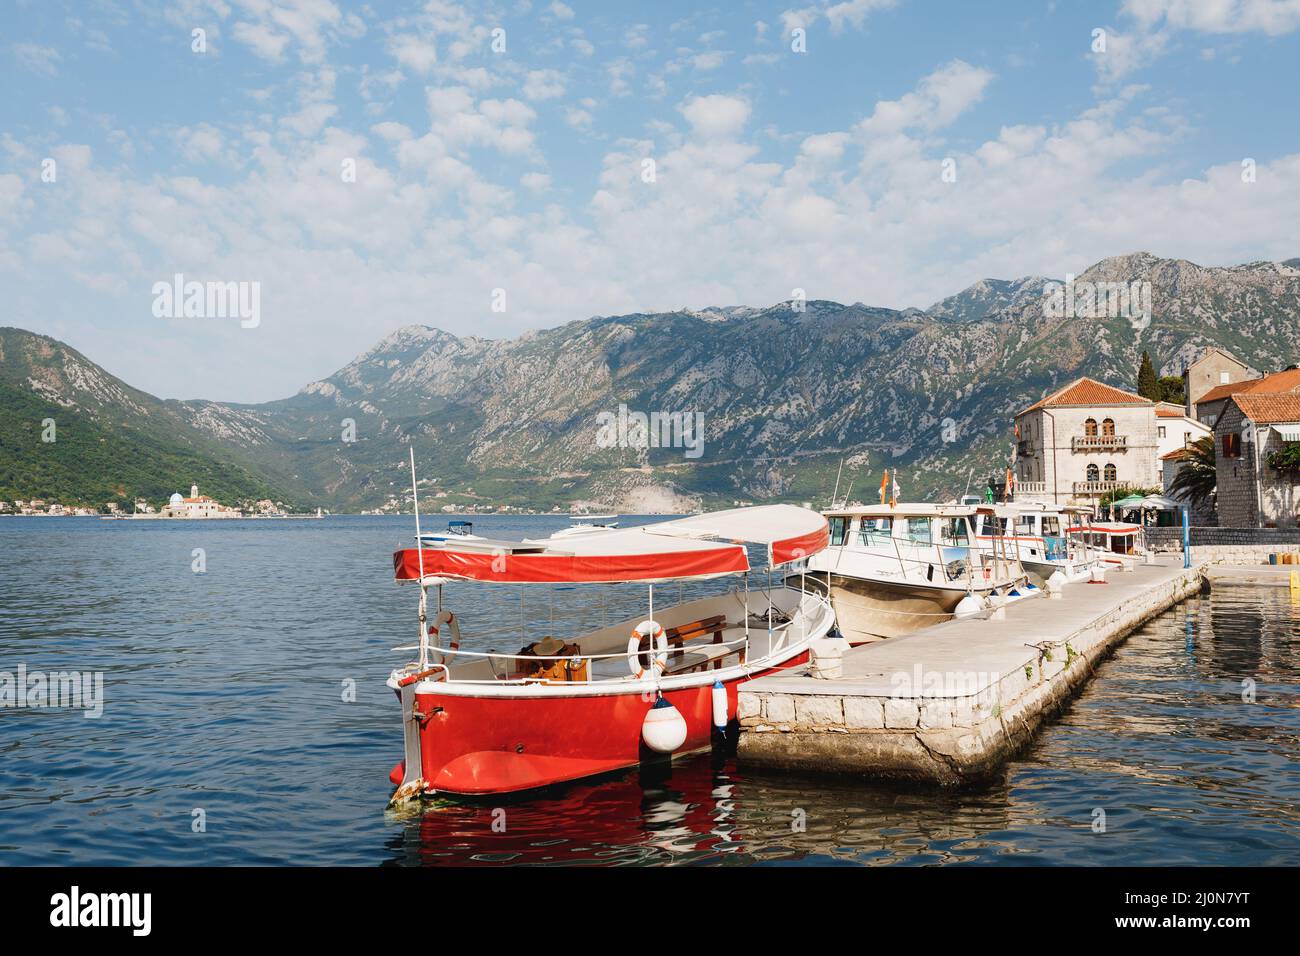 Row of boats are moored at the pier in the Kotor Bay off the coast of Perast. Montenegro Stock Photo